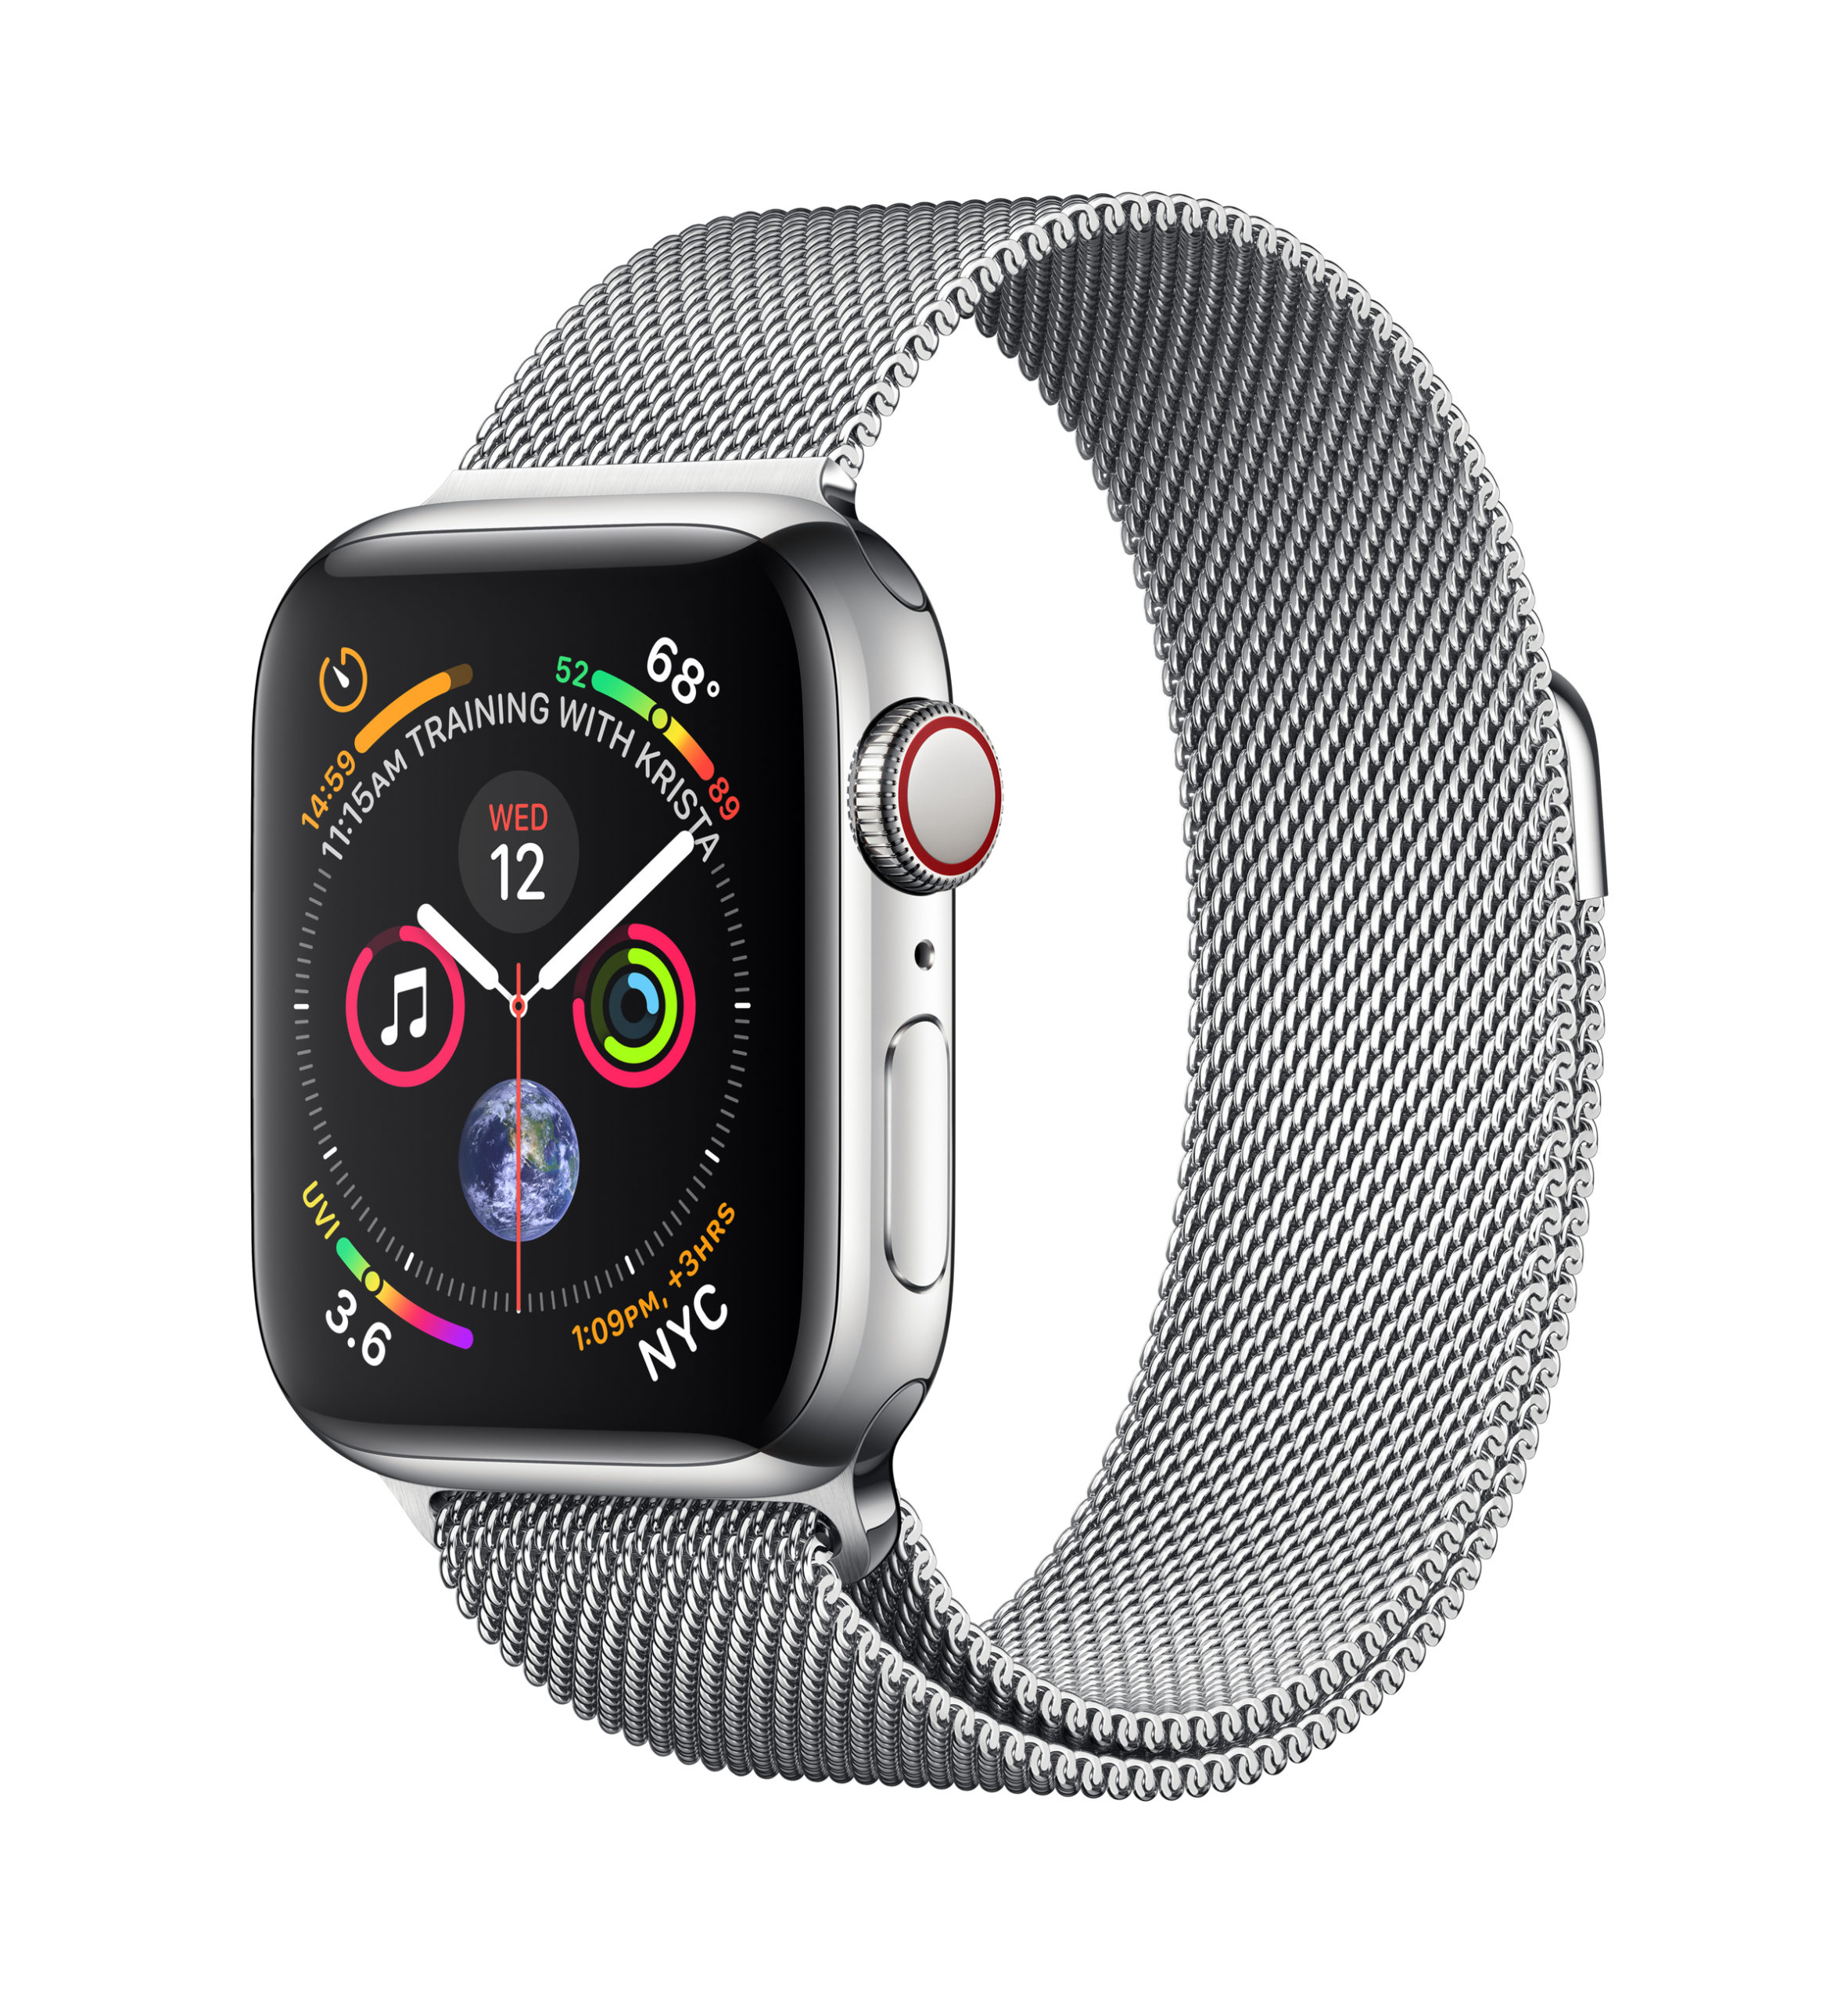 MTUM2LL/A | $344 | Apple Watch Series 4 GPS + Cellular 40mm Stainless Steel, Milanese Loop